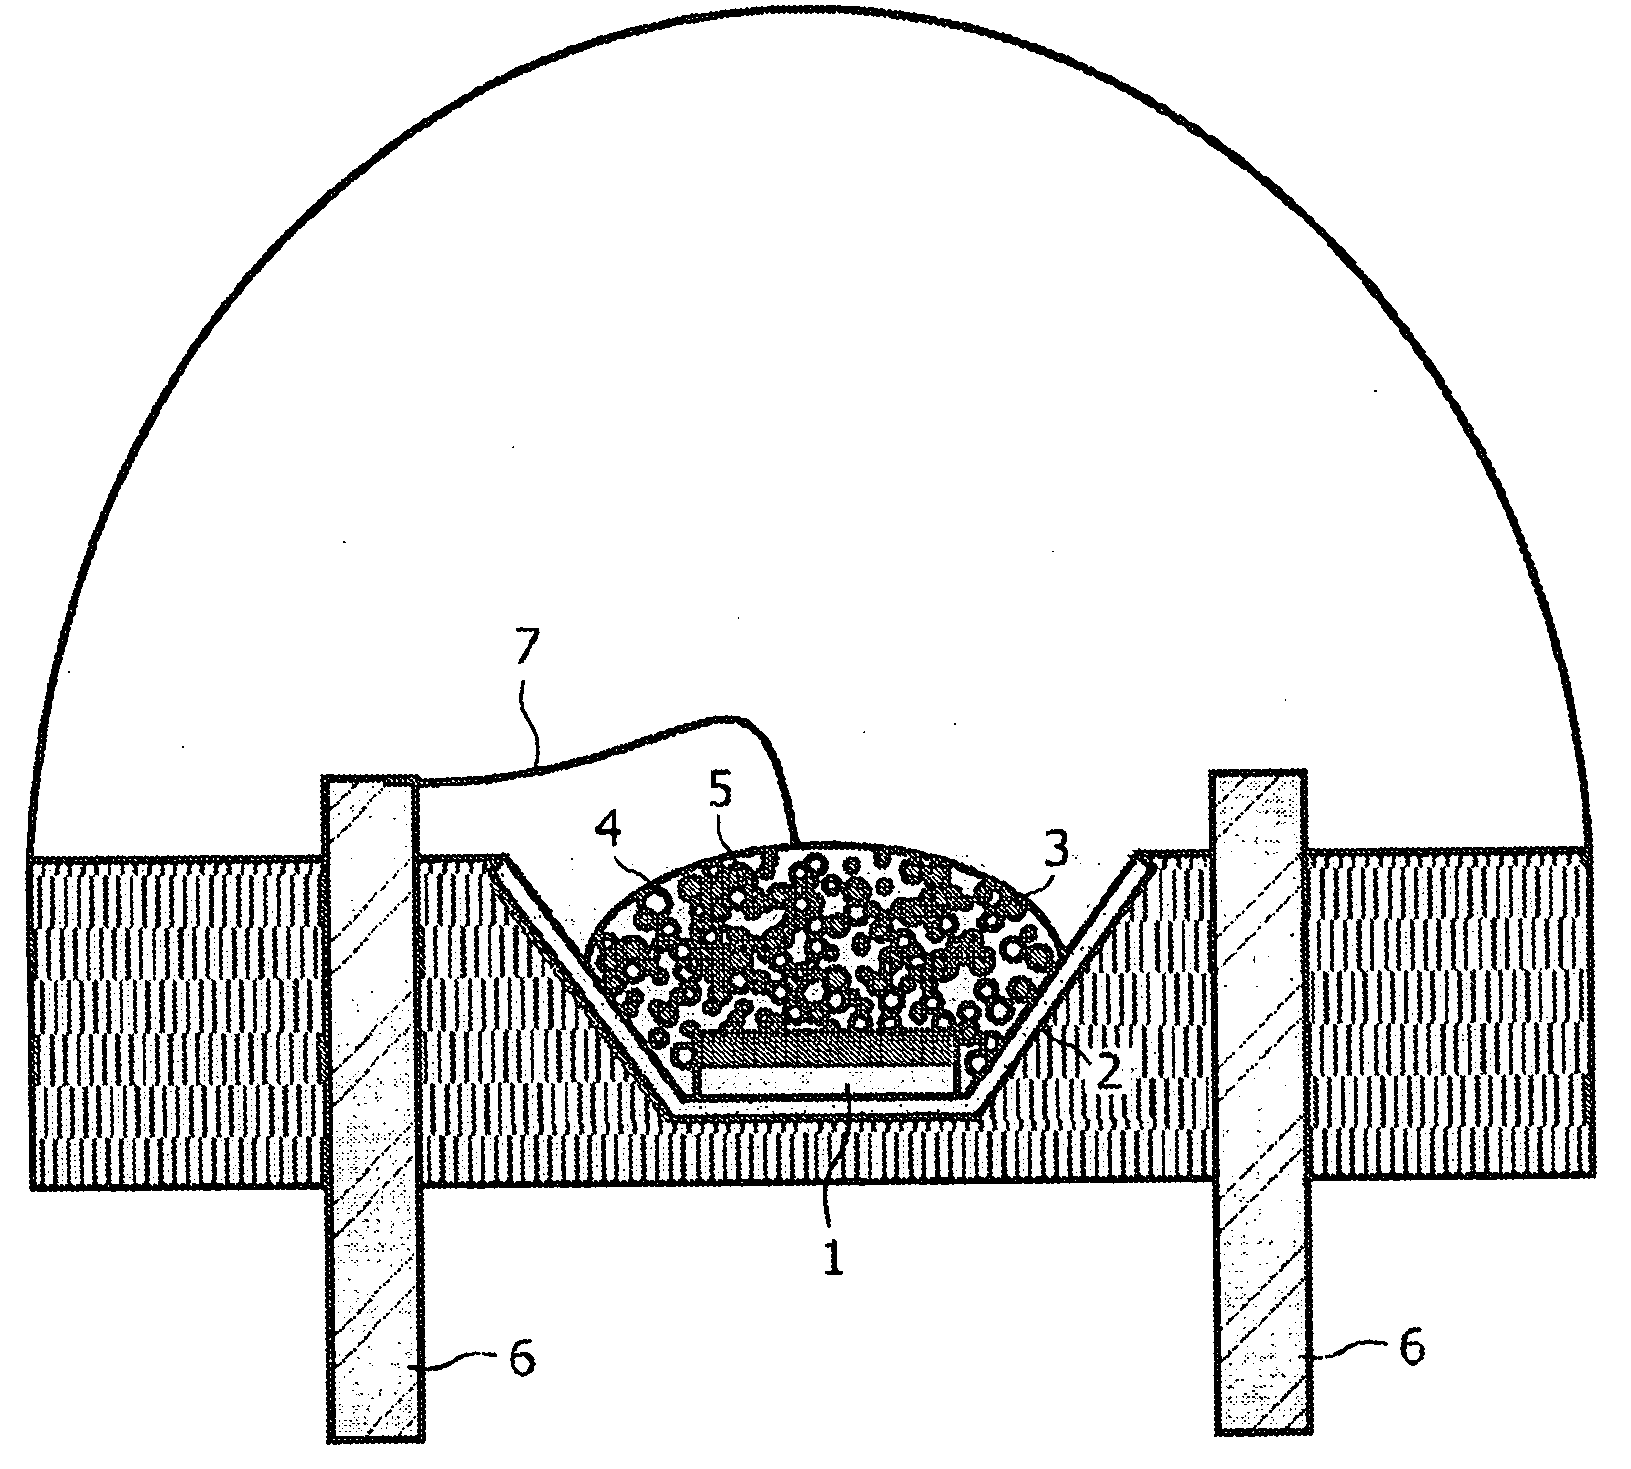 Illumination system comprising a radiation source and a luminescent material